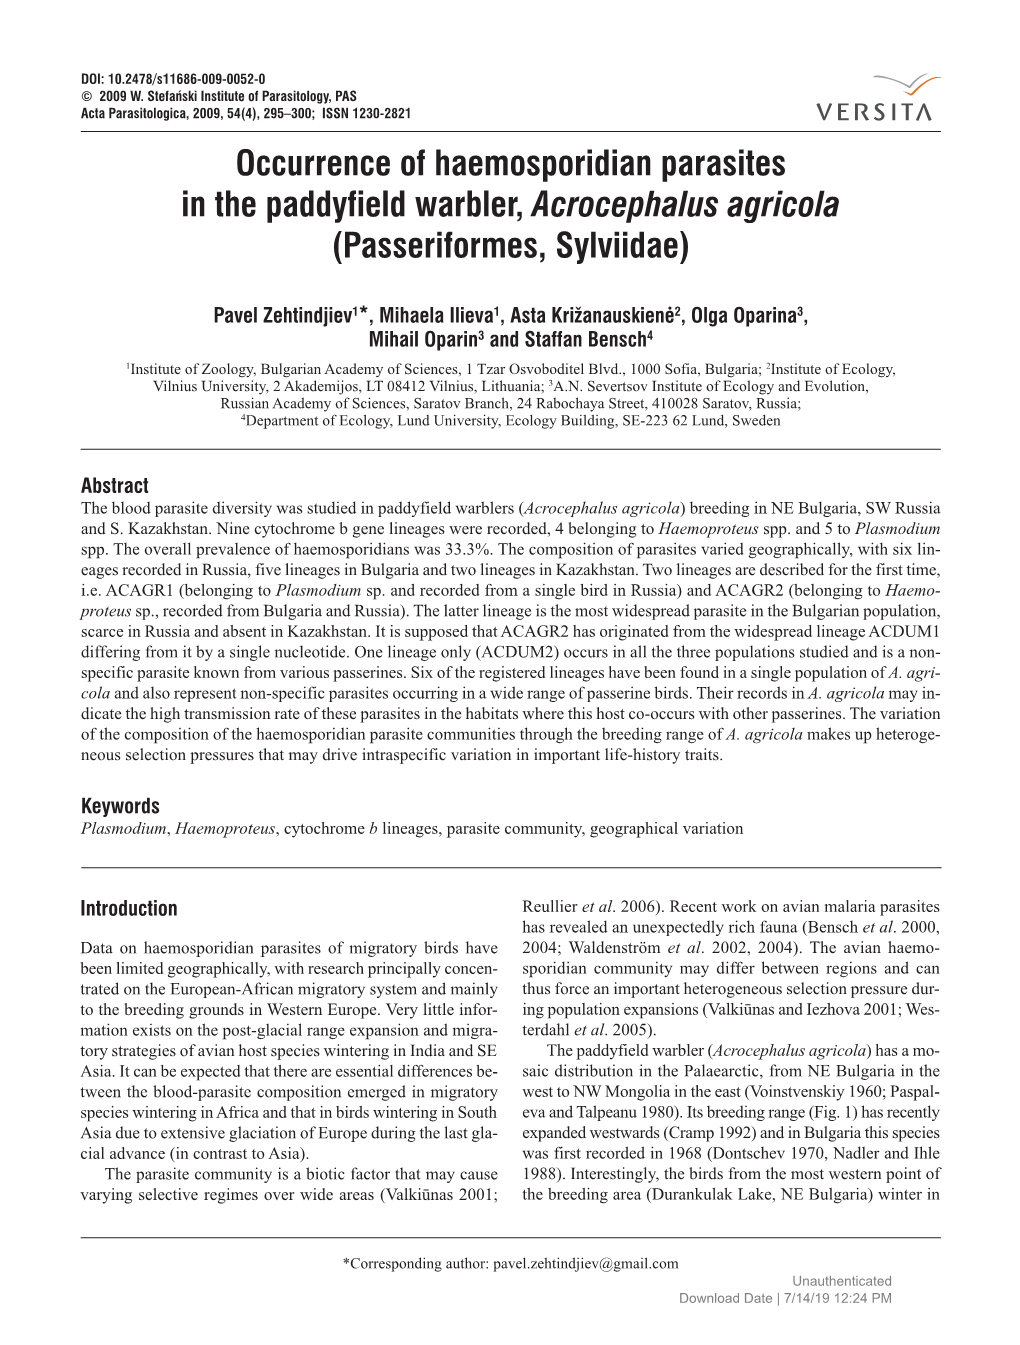 Occurrence of Haemosporidian Parasites in the Paddyfield Warbler, Acrocephalus Agricola (Passeriformes, Sylviidae)